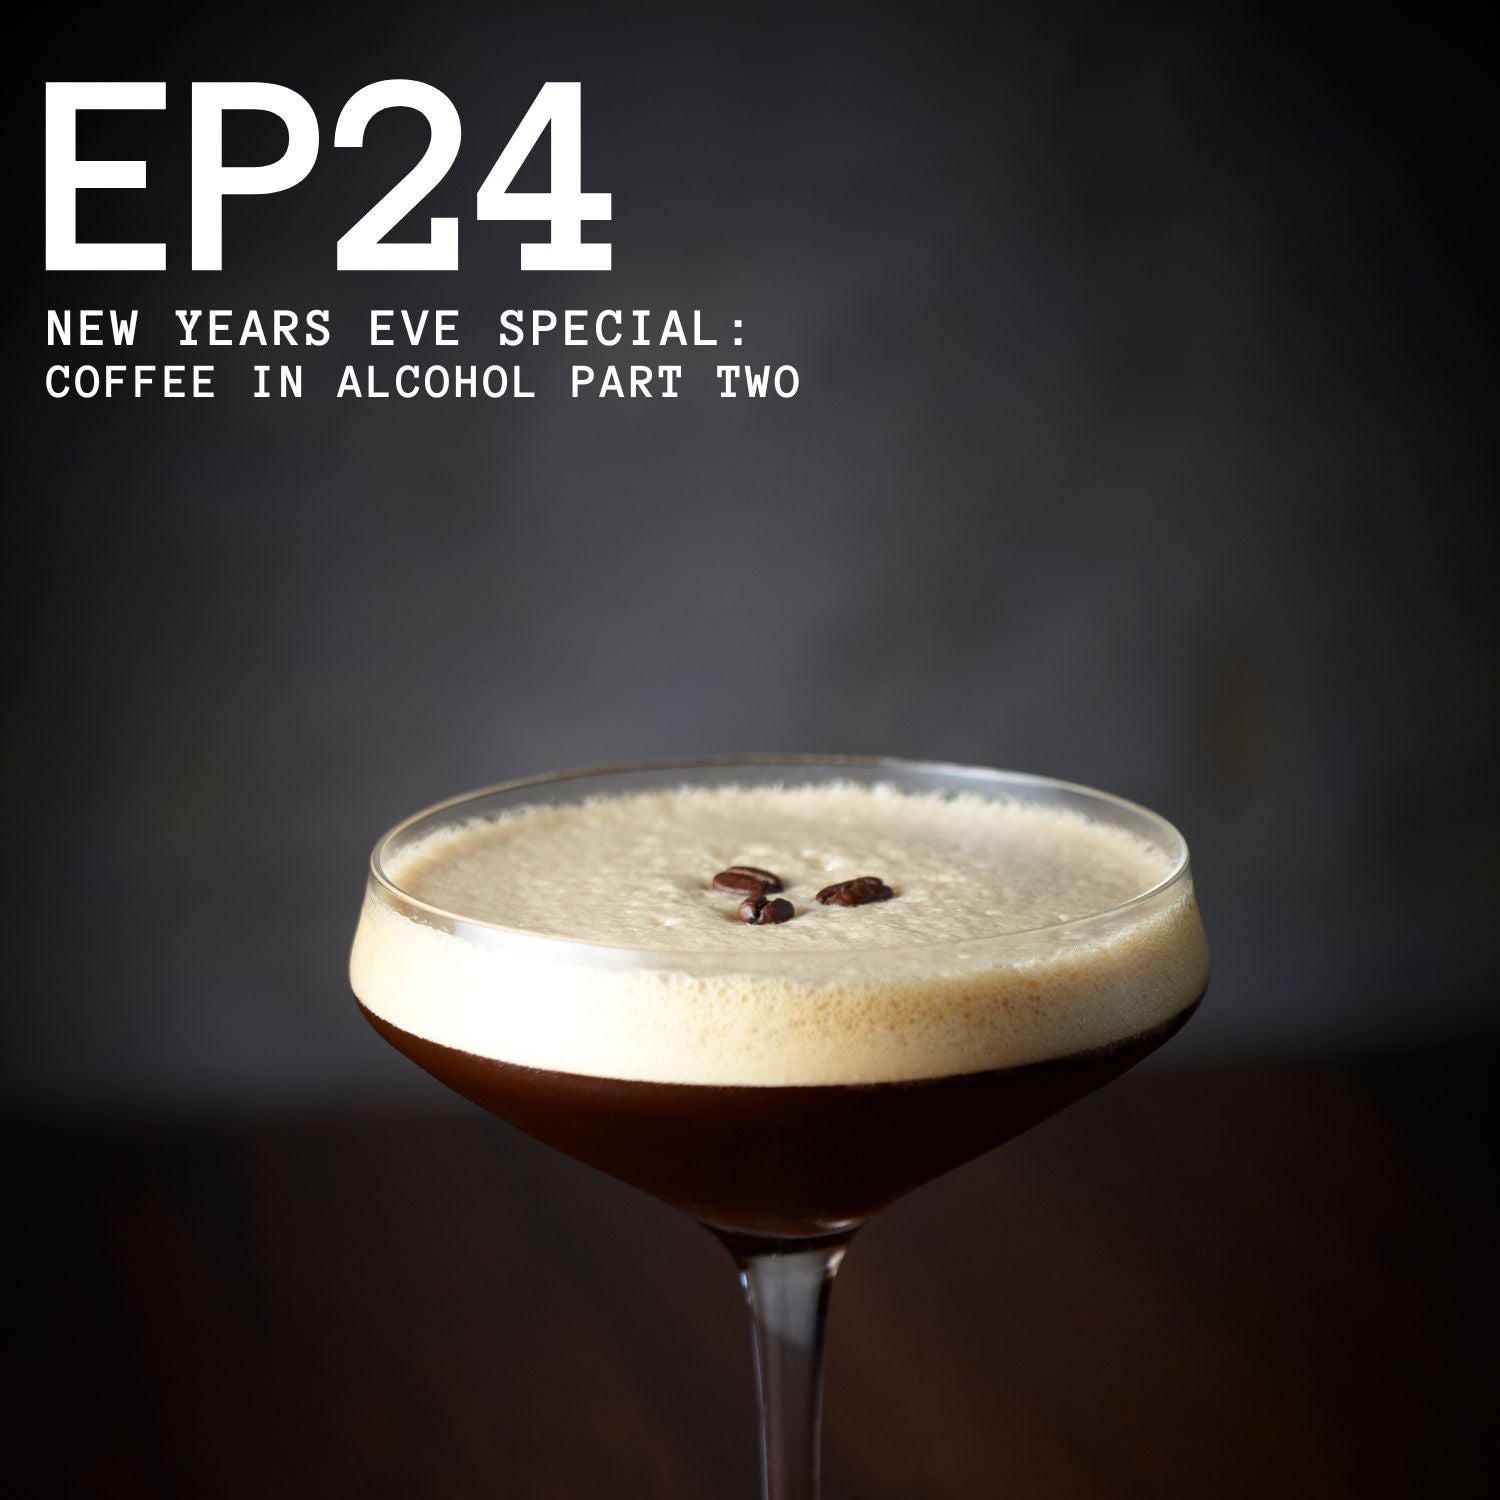 Episode 24 - New Years Eve 2021: Coffee in Alcohol Part 2